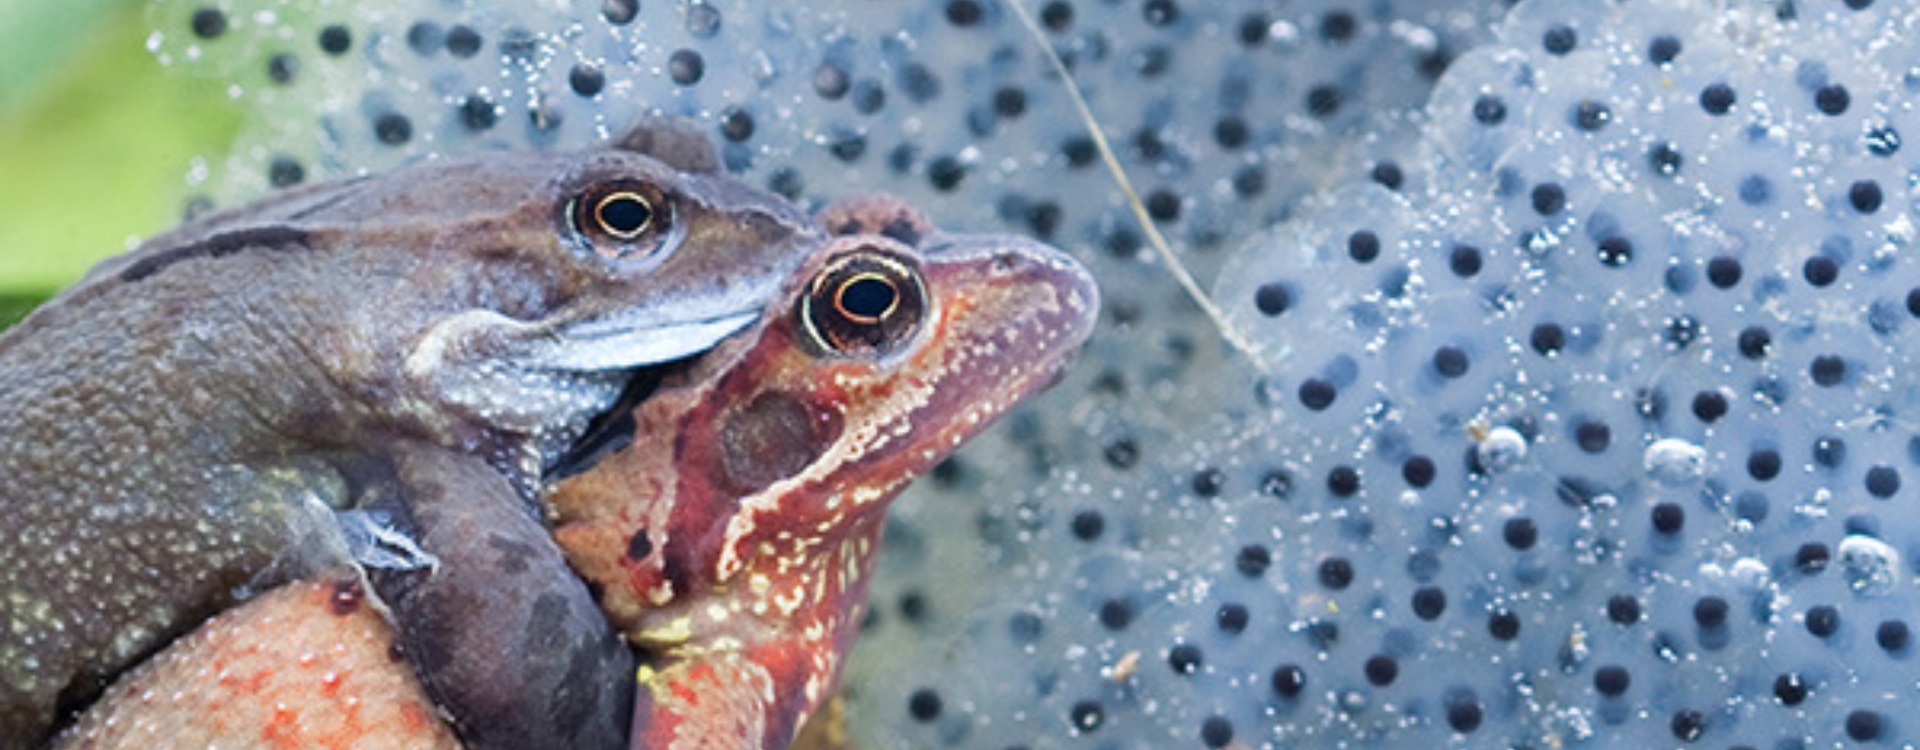 Your frog spawn questions answered